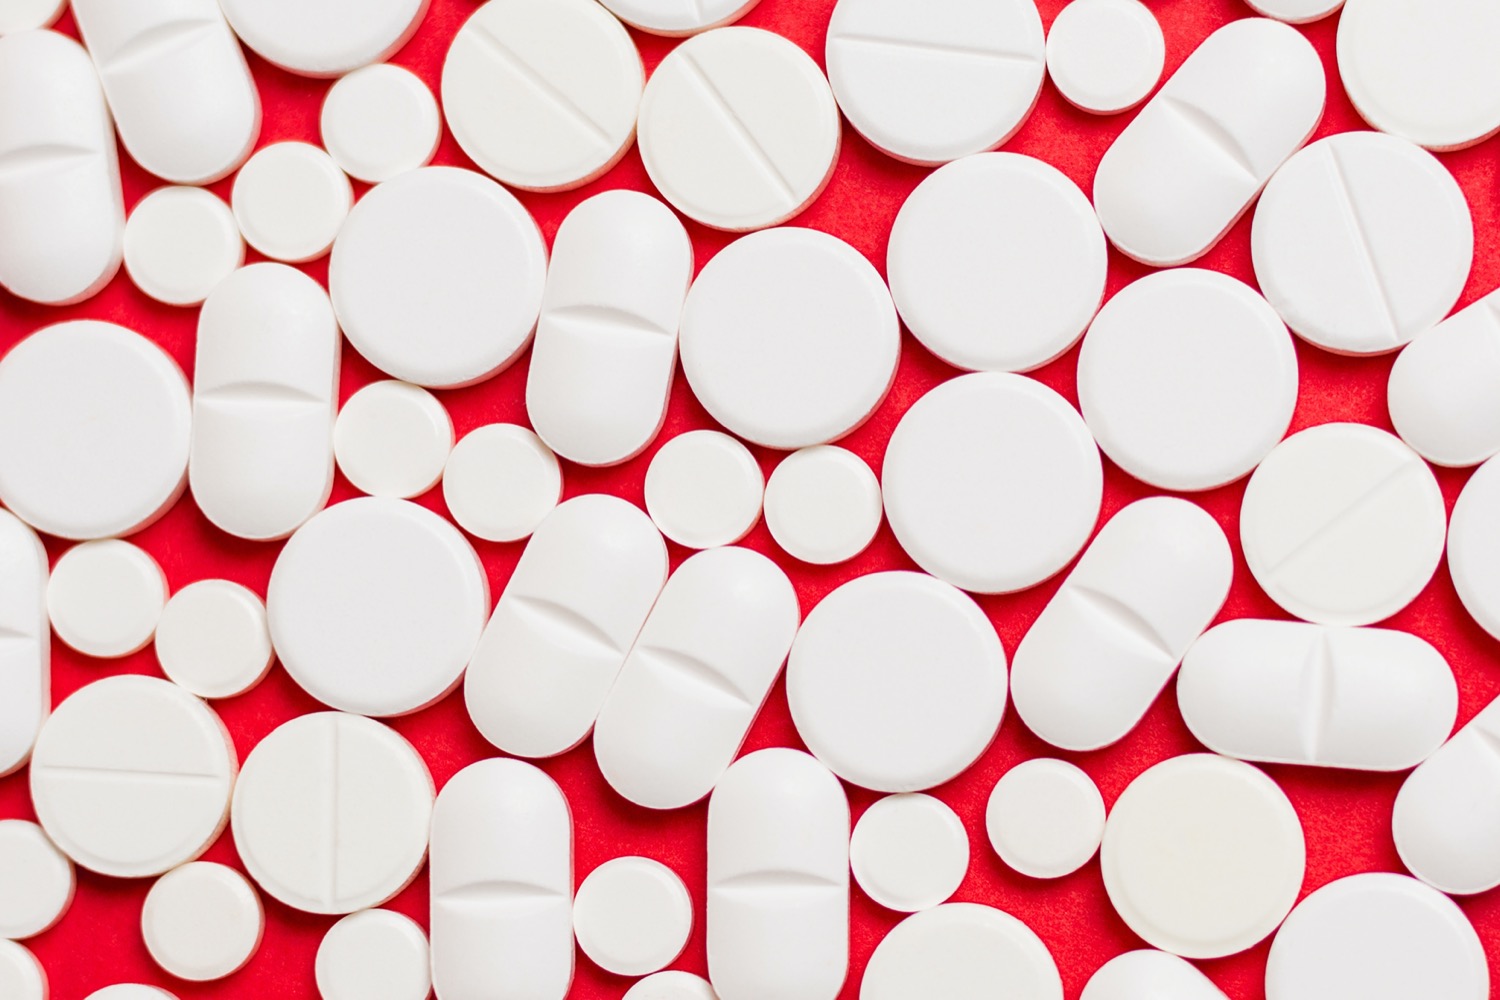 dozens of white pills of different shapes and sizes on a red background